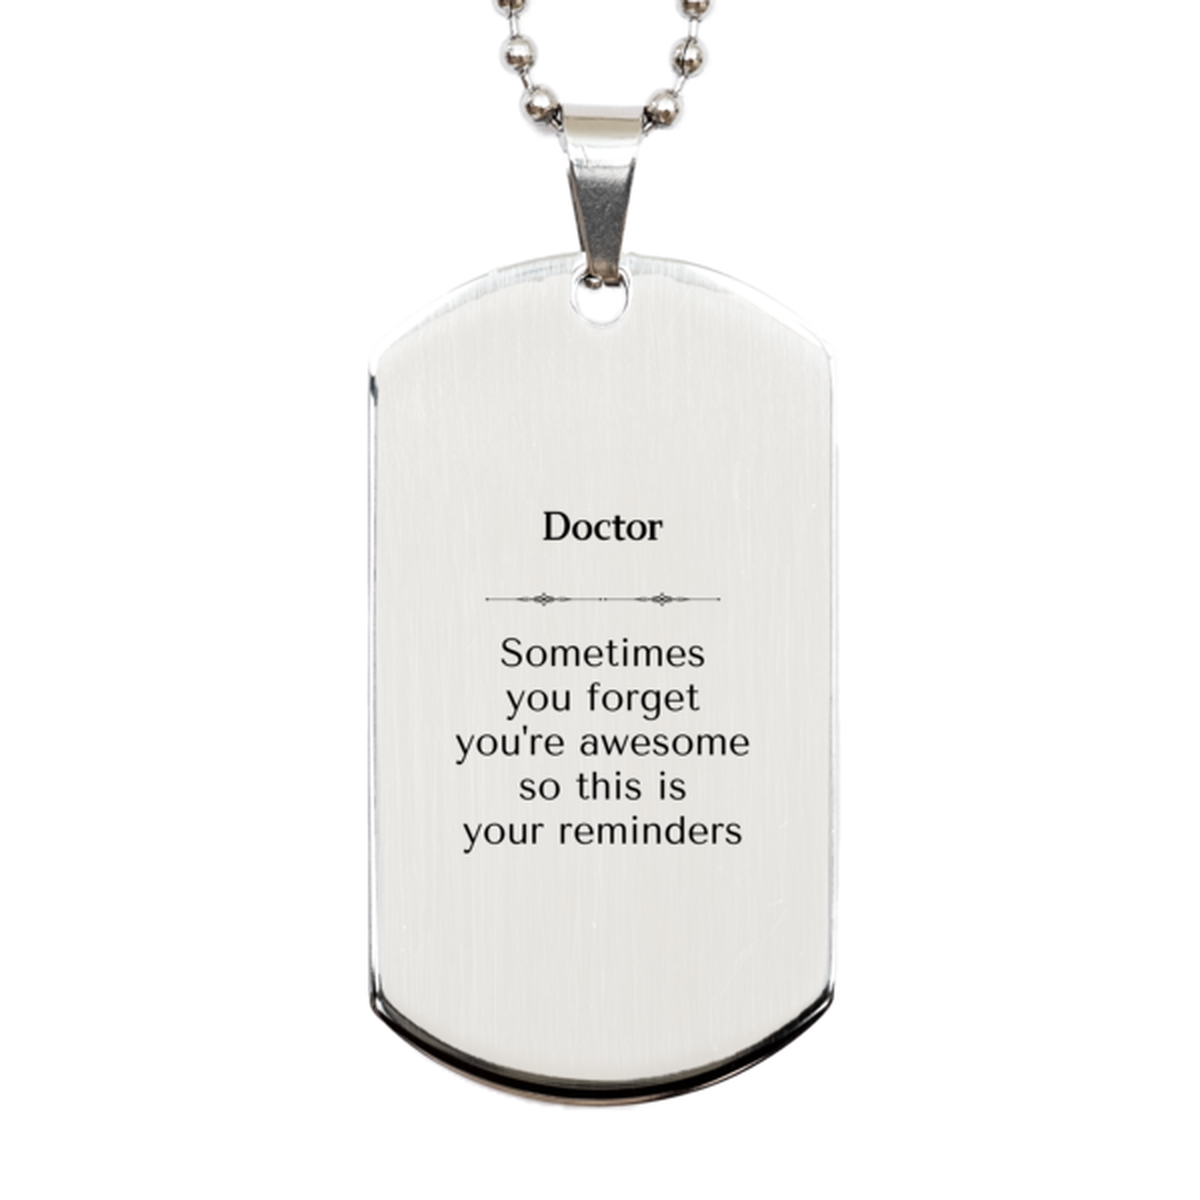 Sentimental Doctor Silver Dog Tag, Doctor Sometimes you forget you're awesome so this is your reminders, Graduation Christmas Birthday Gifts for Doctor, Men, Women, Coworkers